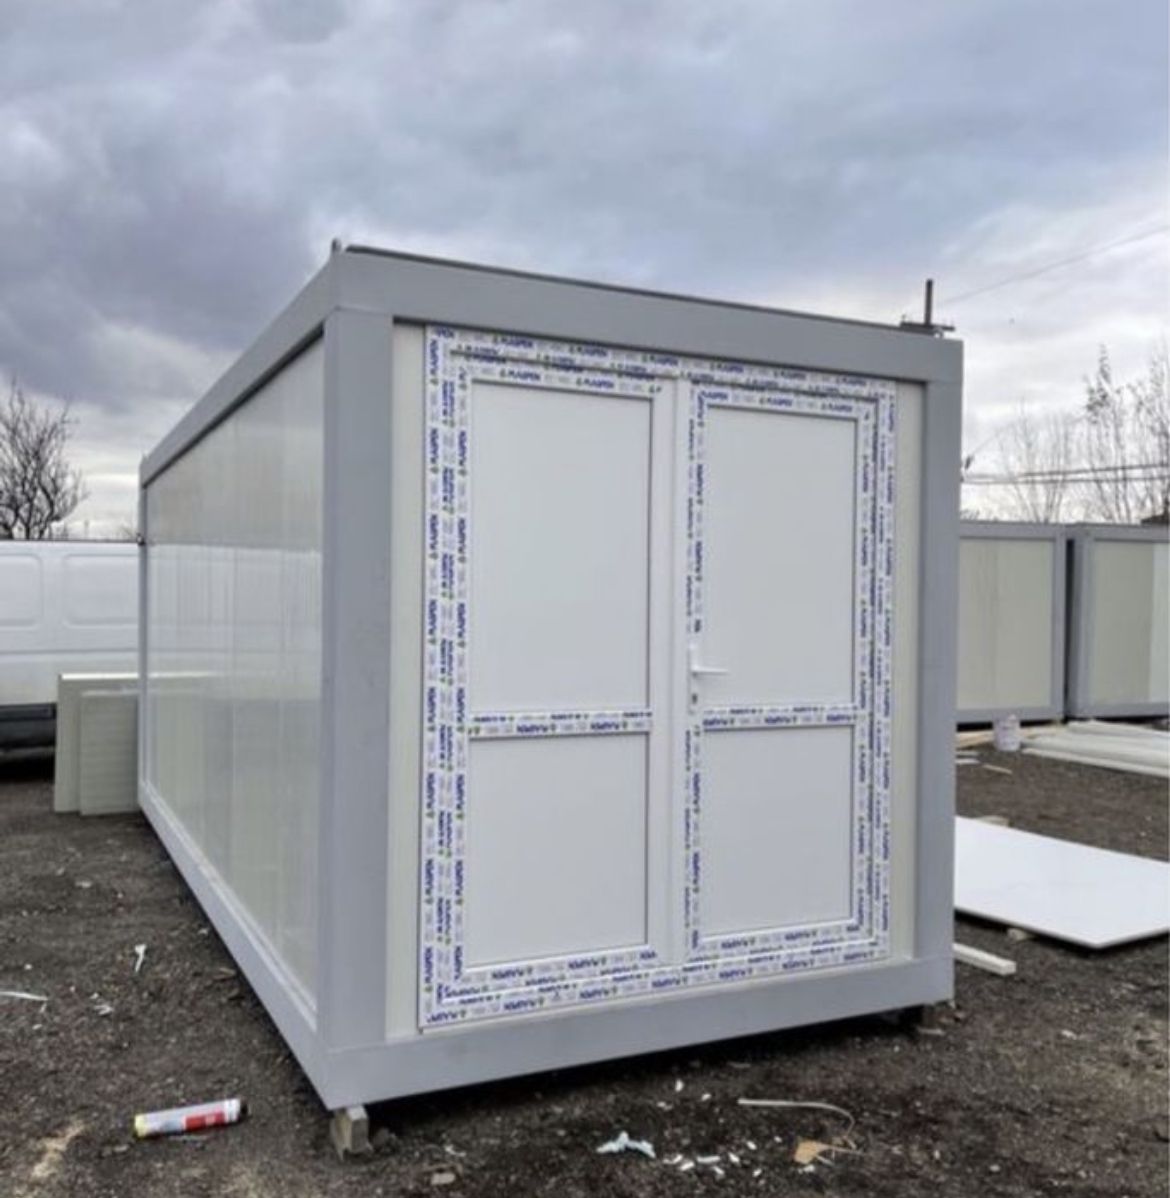 Vand container 2,4x12 POZE REALE